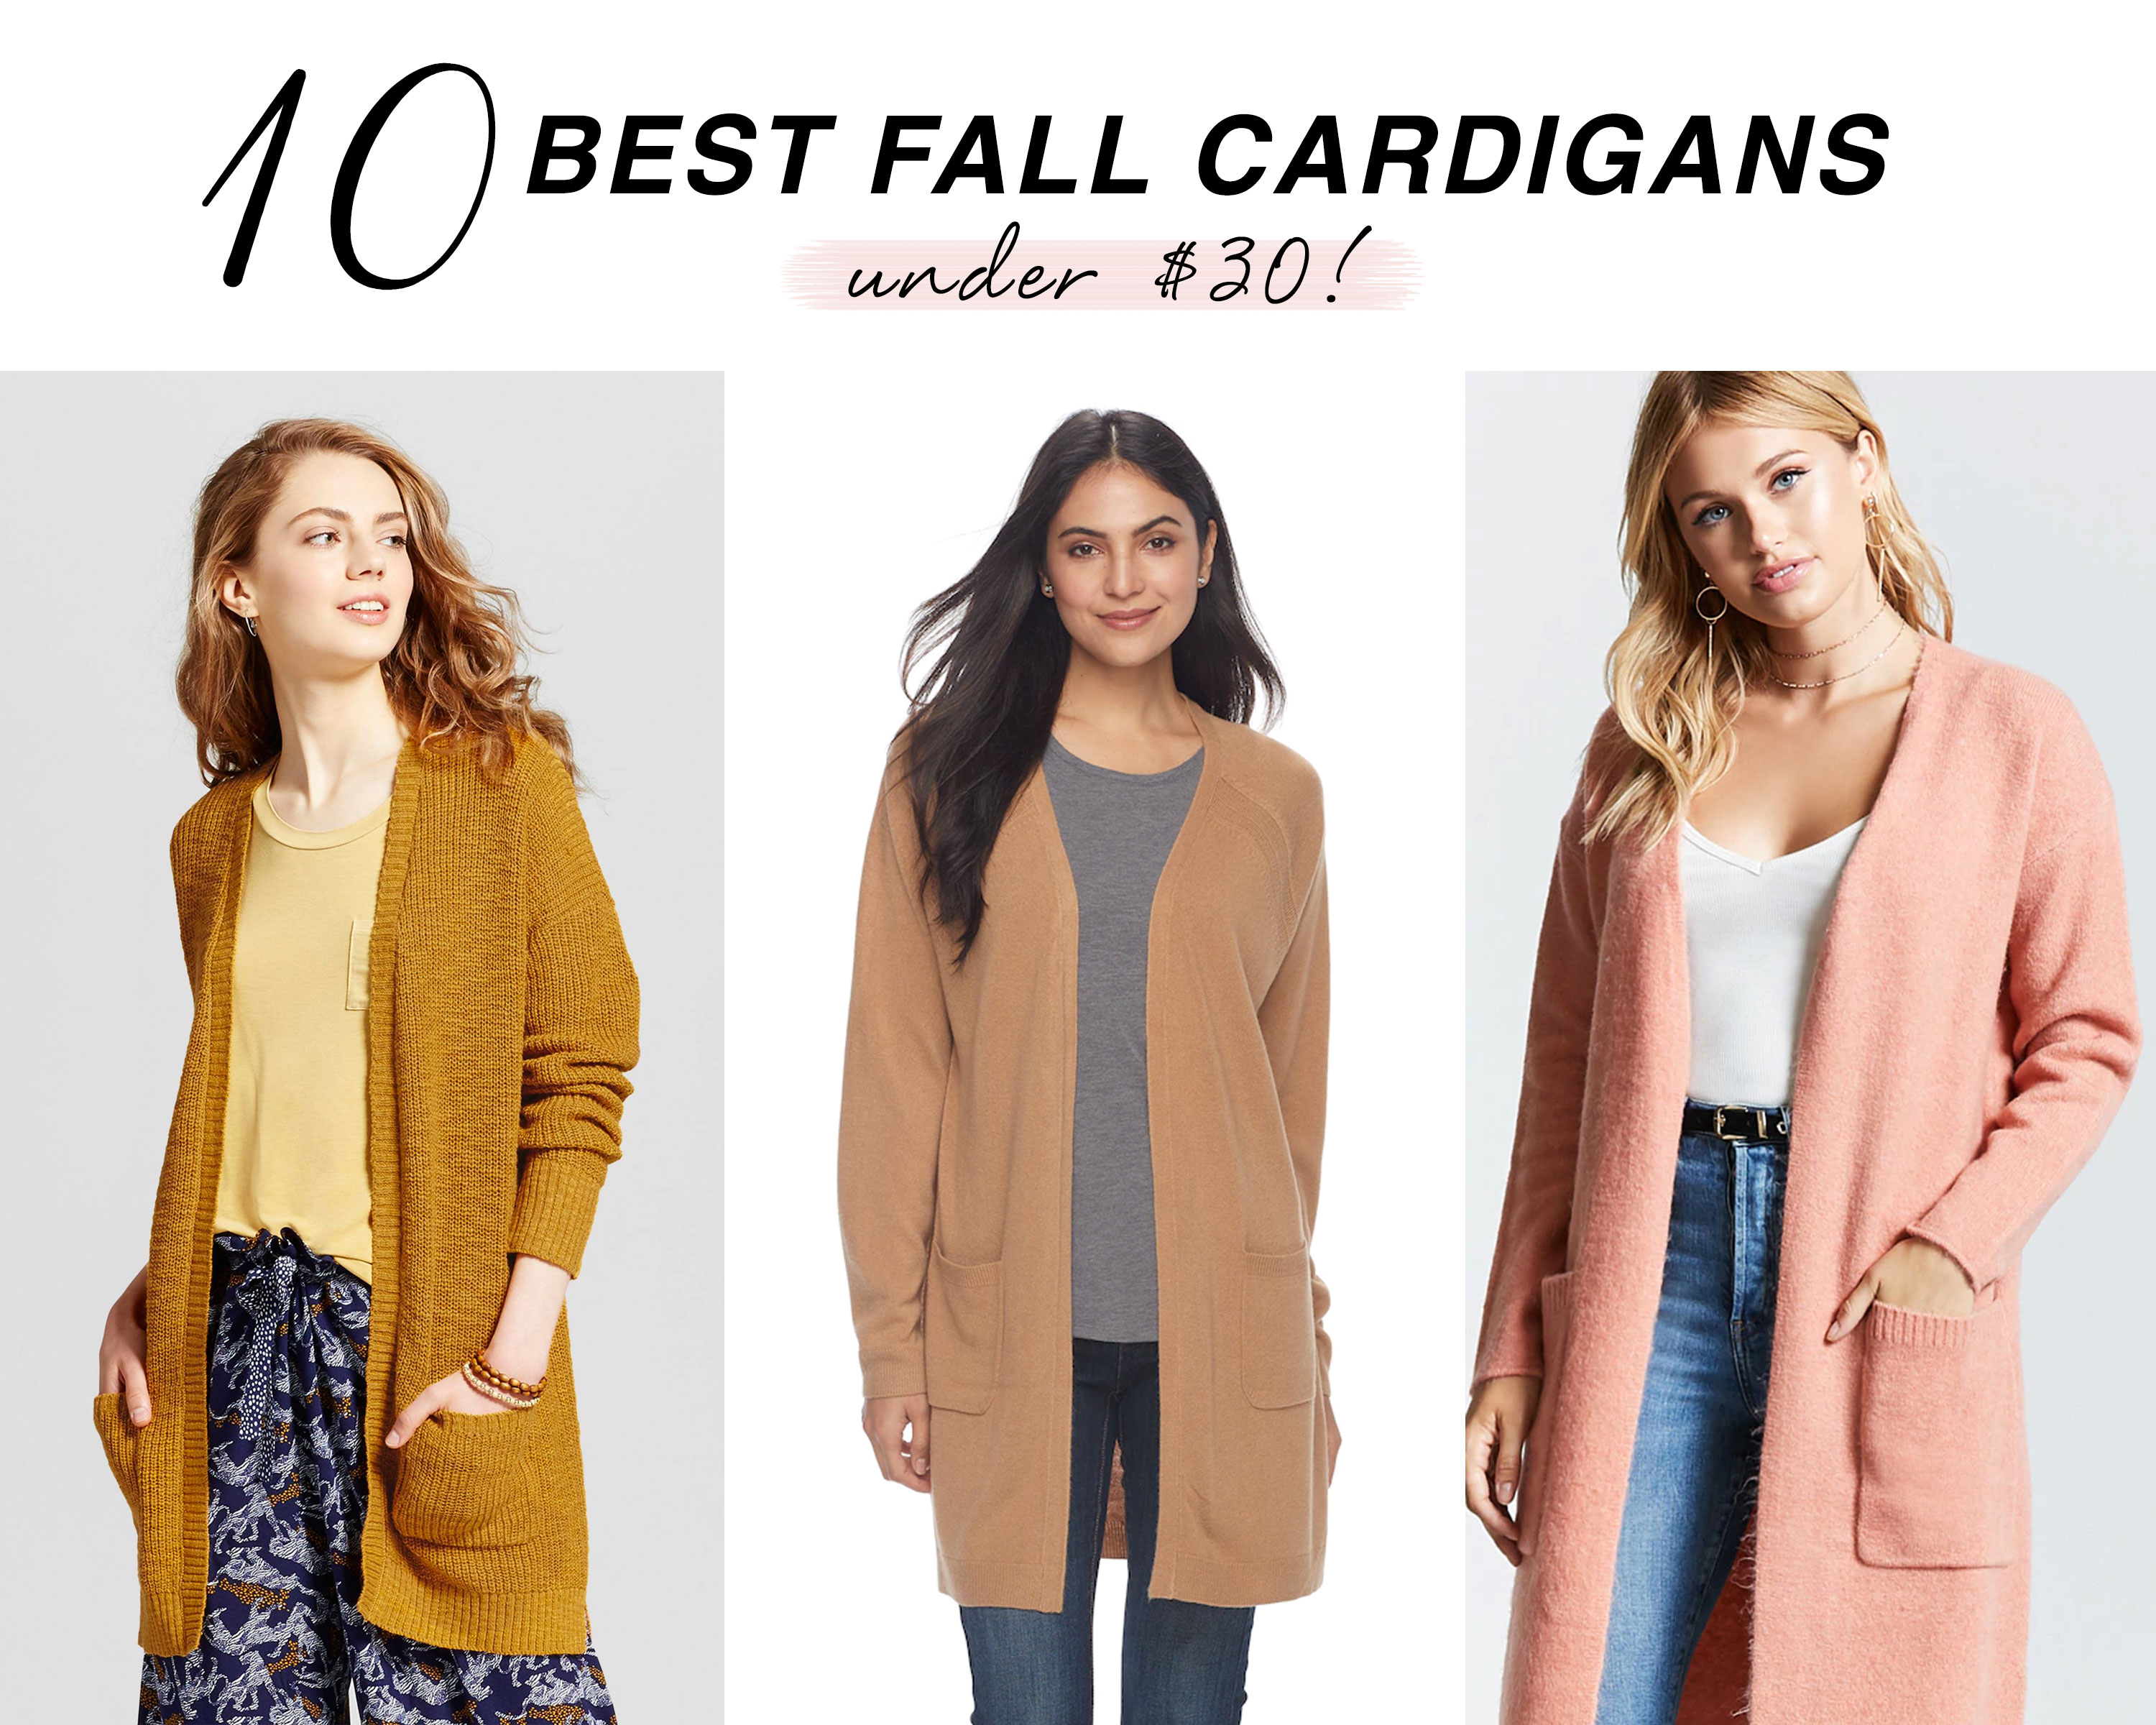 Shop the best fall cardigans on a budget